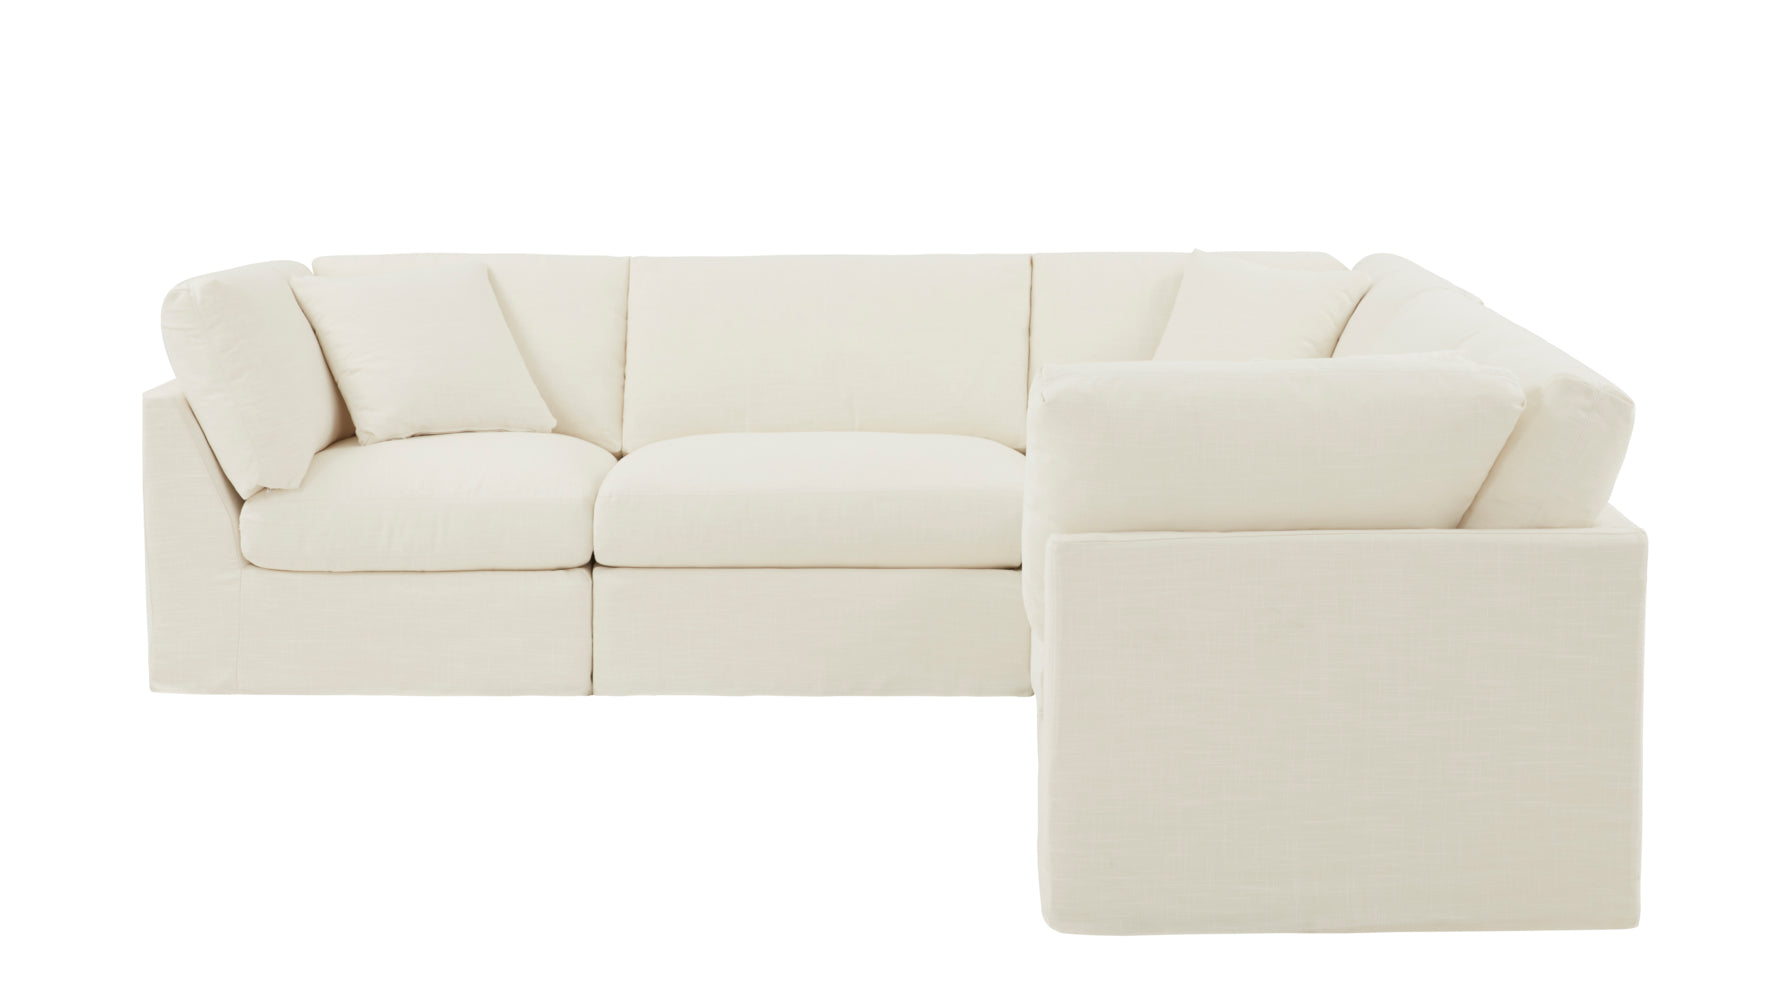 Get Together™ 5-Piece Modular Sectional Closed, Standard, Cream Linen - Image 7